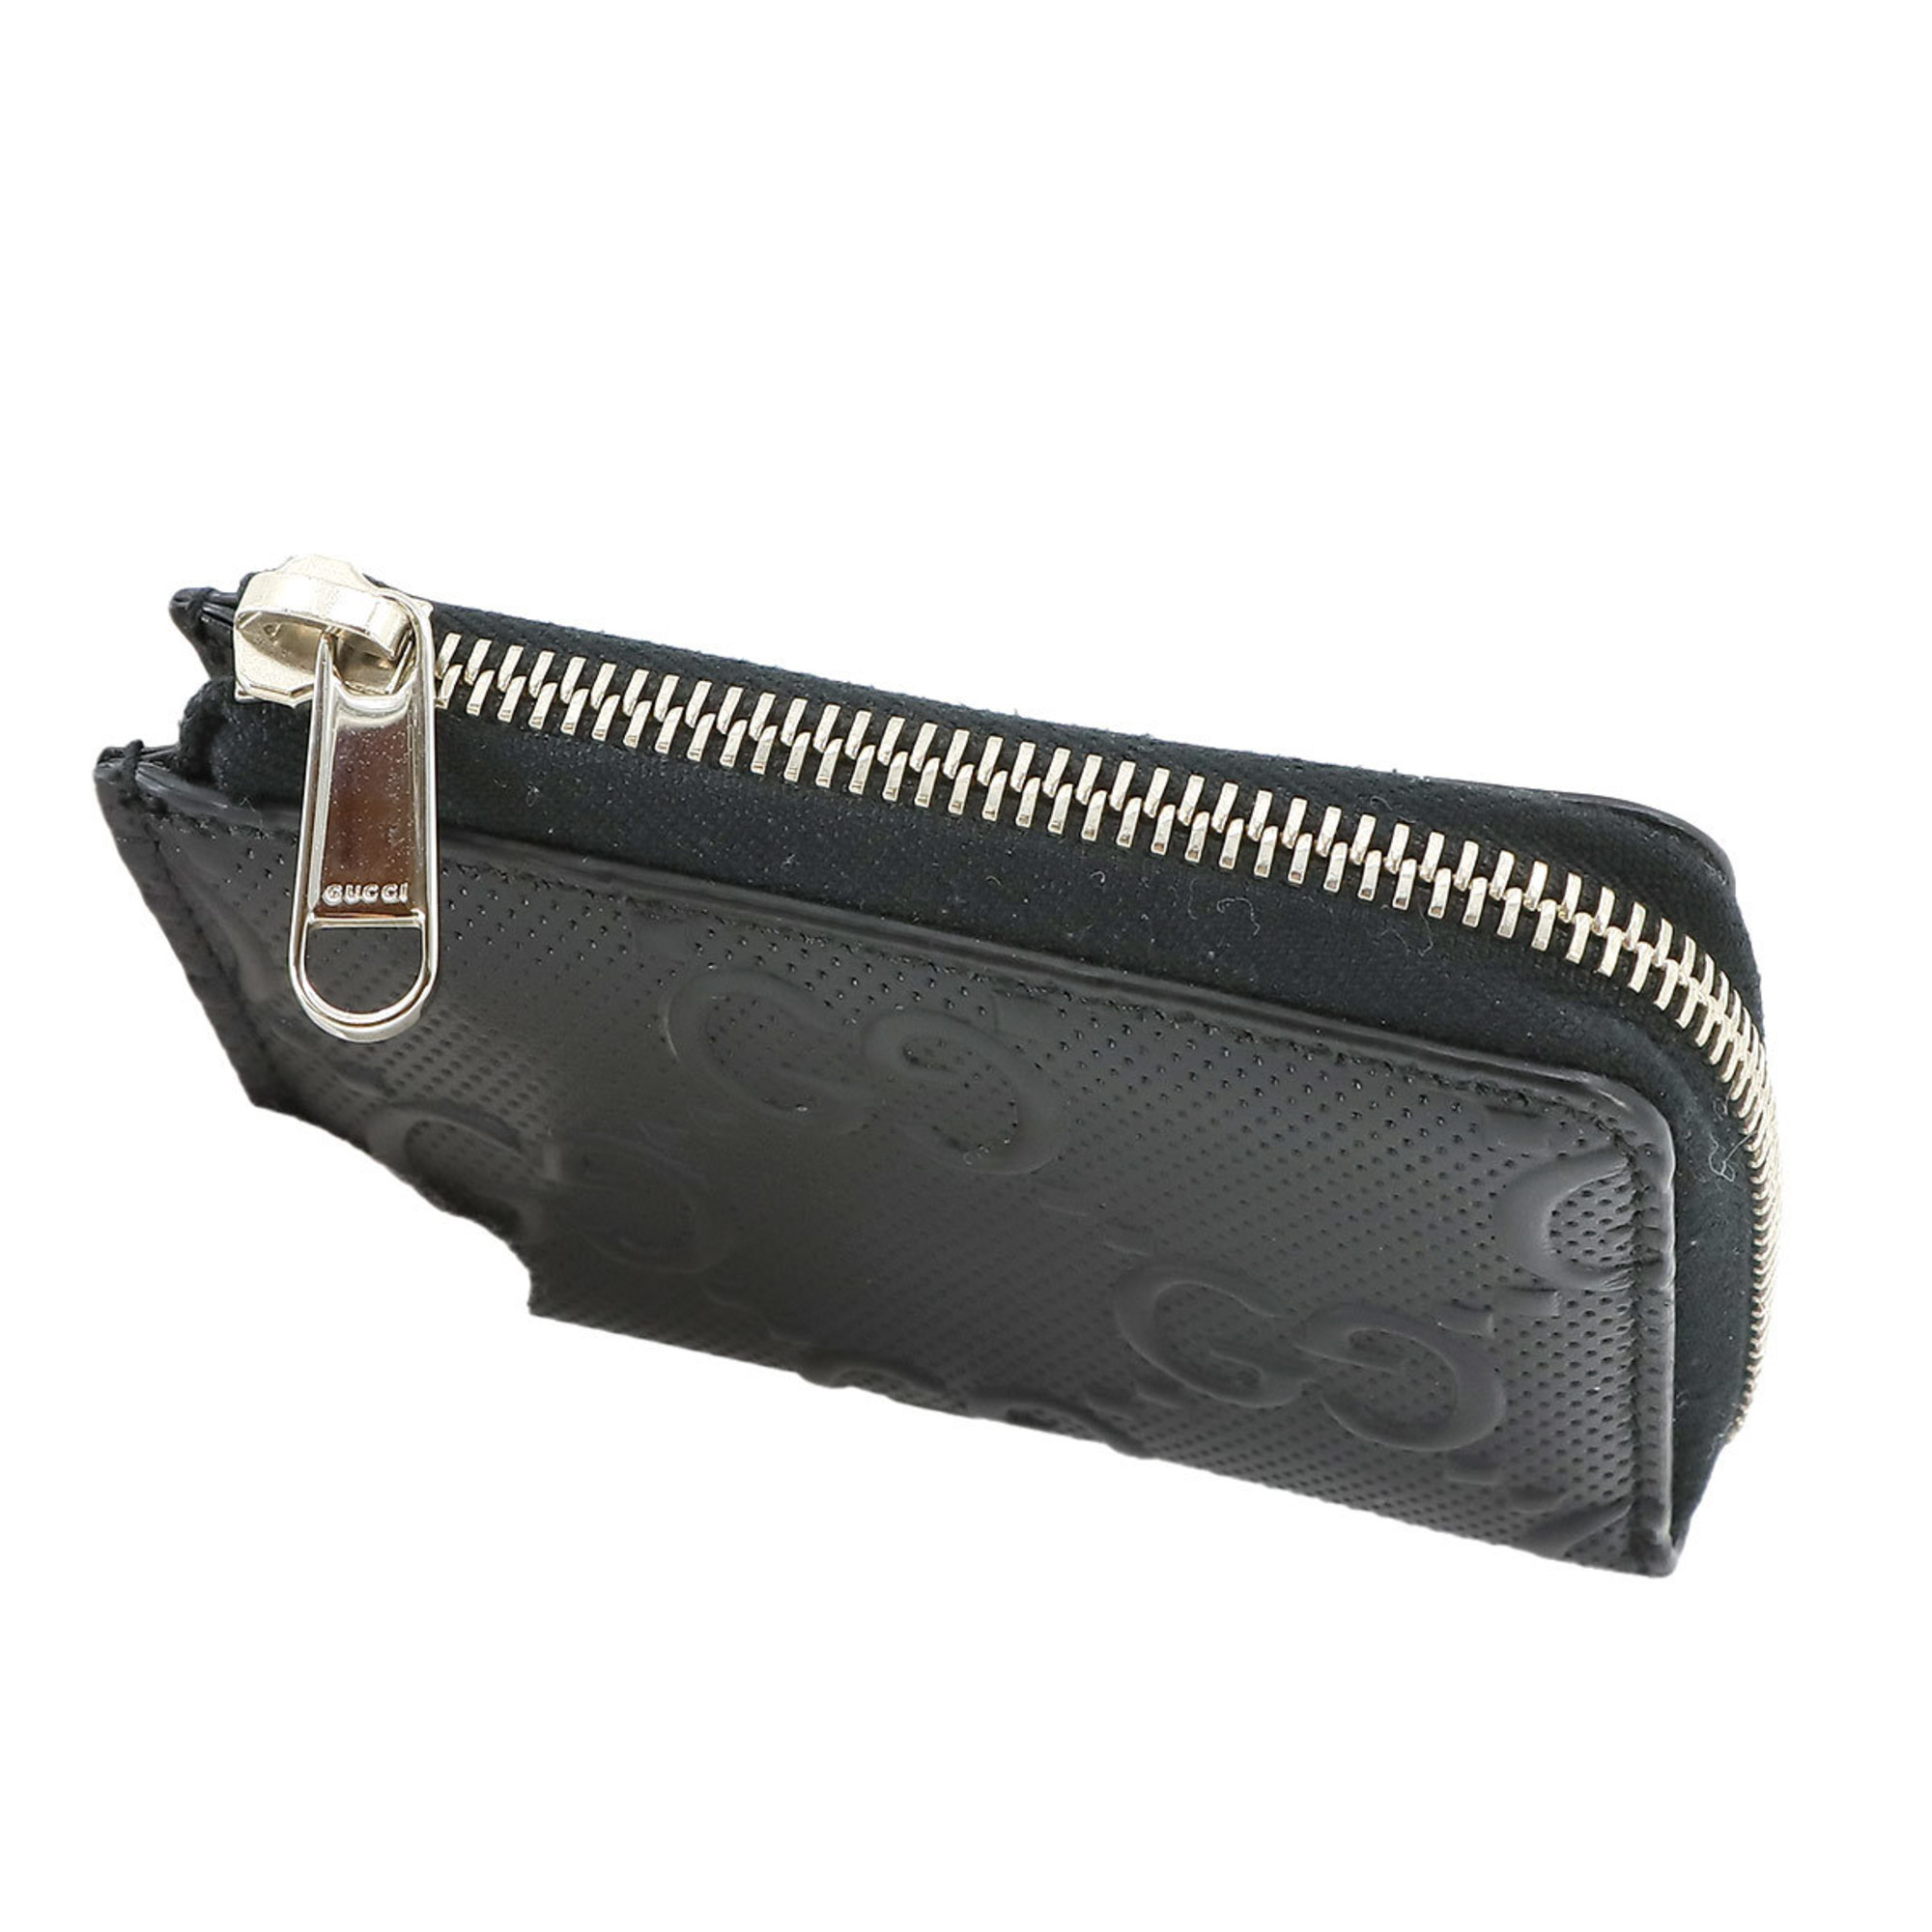 GUCCI GG embossed L-shaped wallet/coin case, coin purse, leather, black, 657571, silver hardware, Coin Case